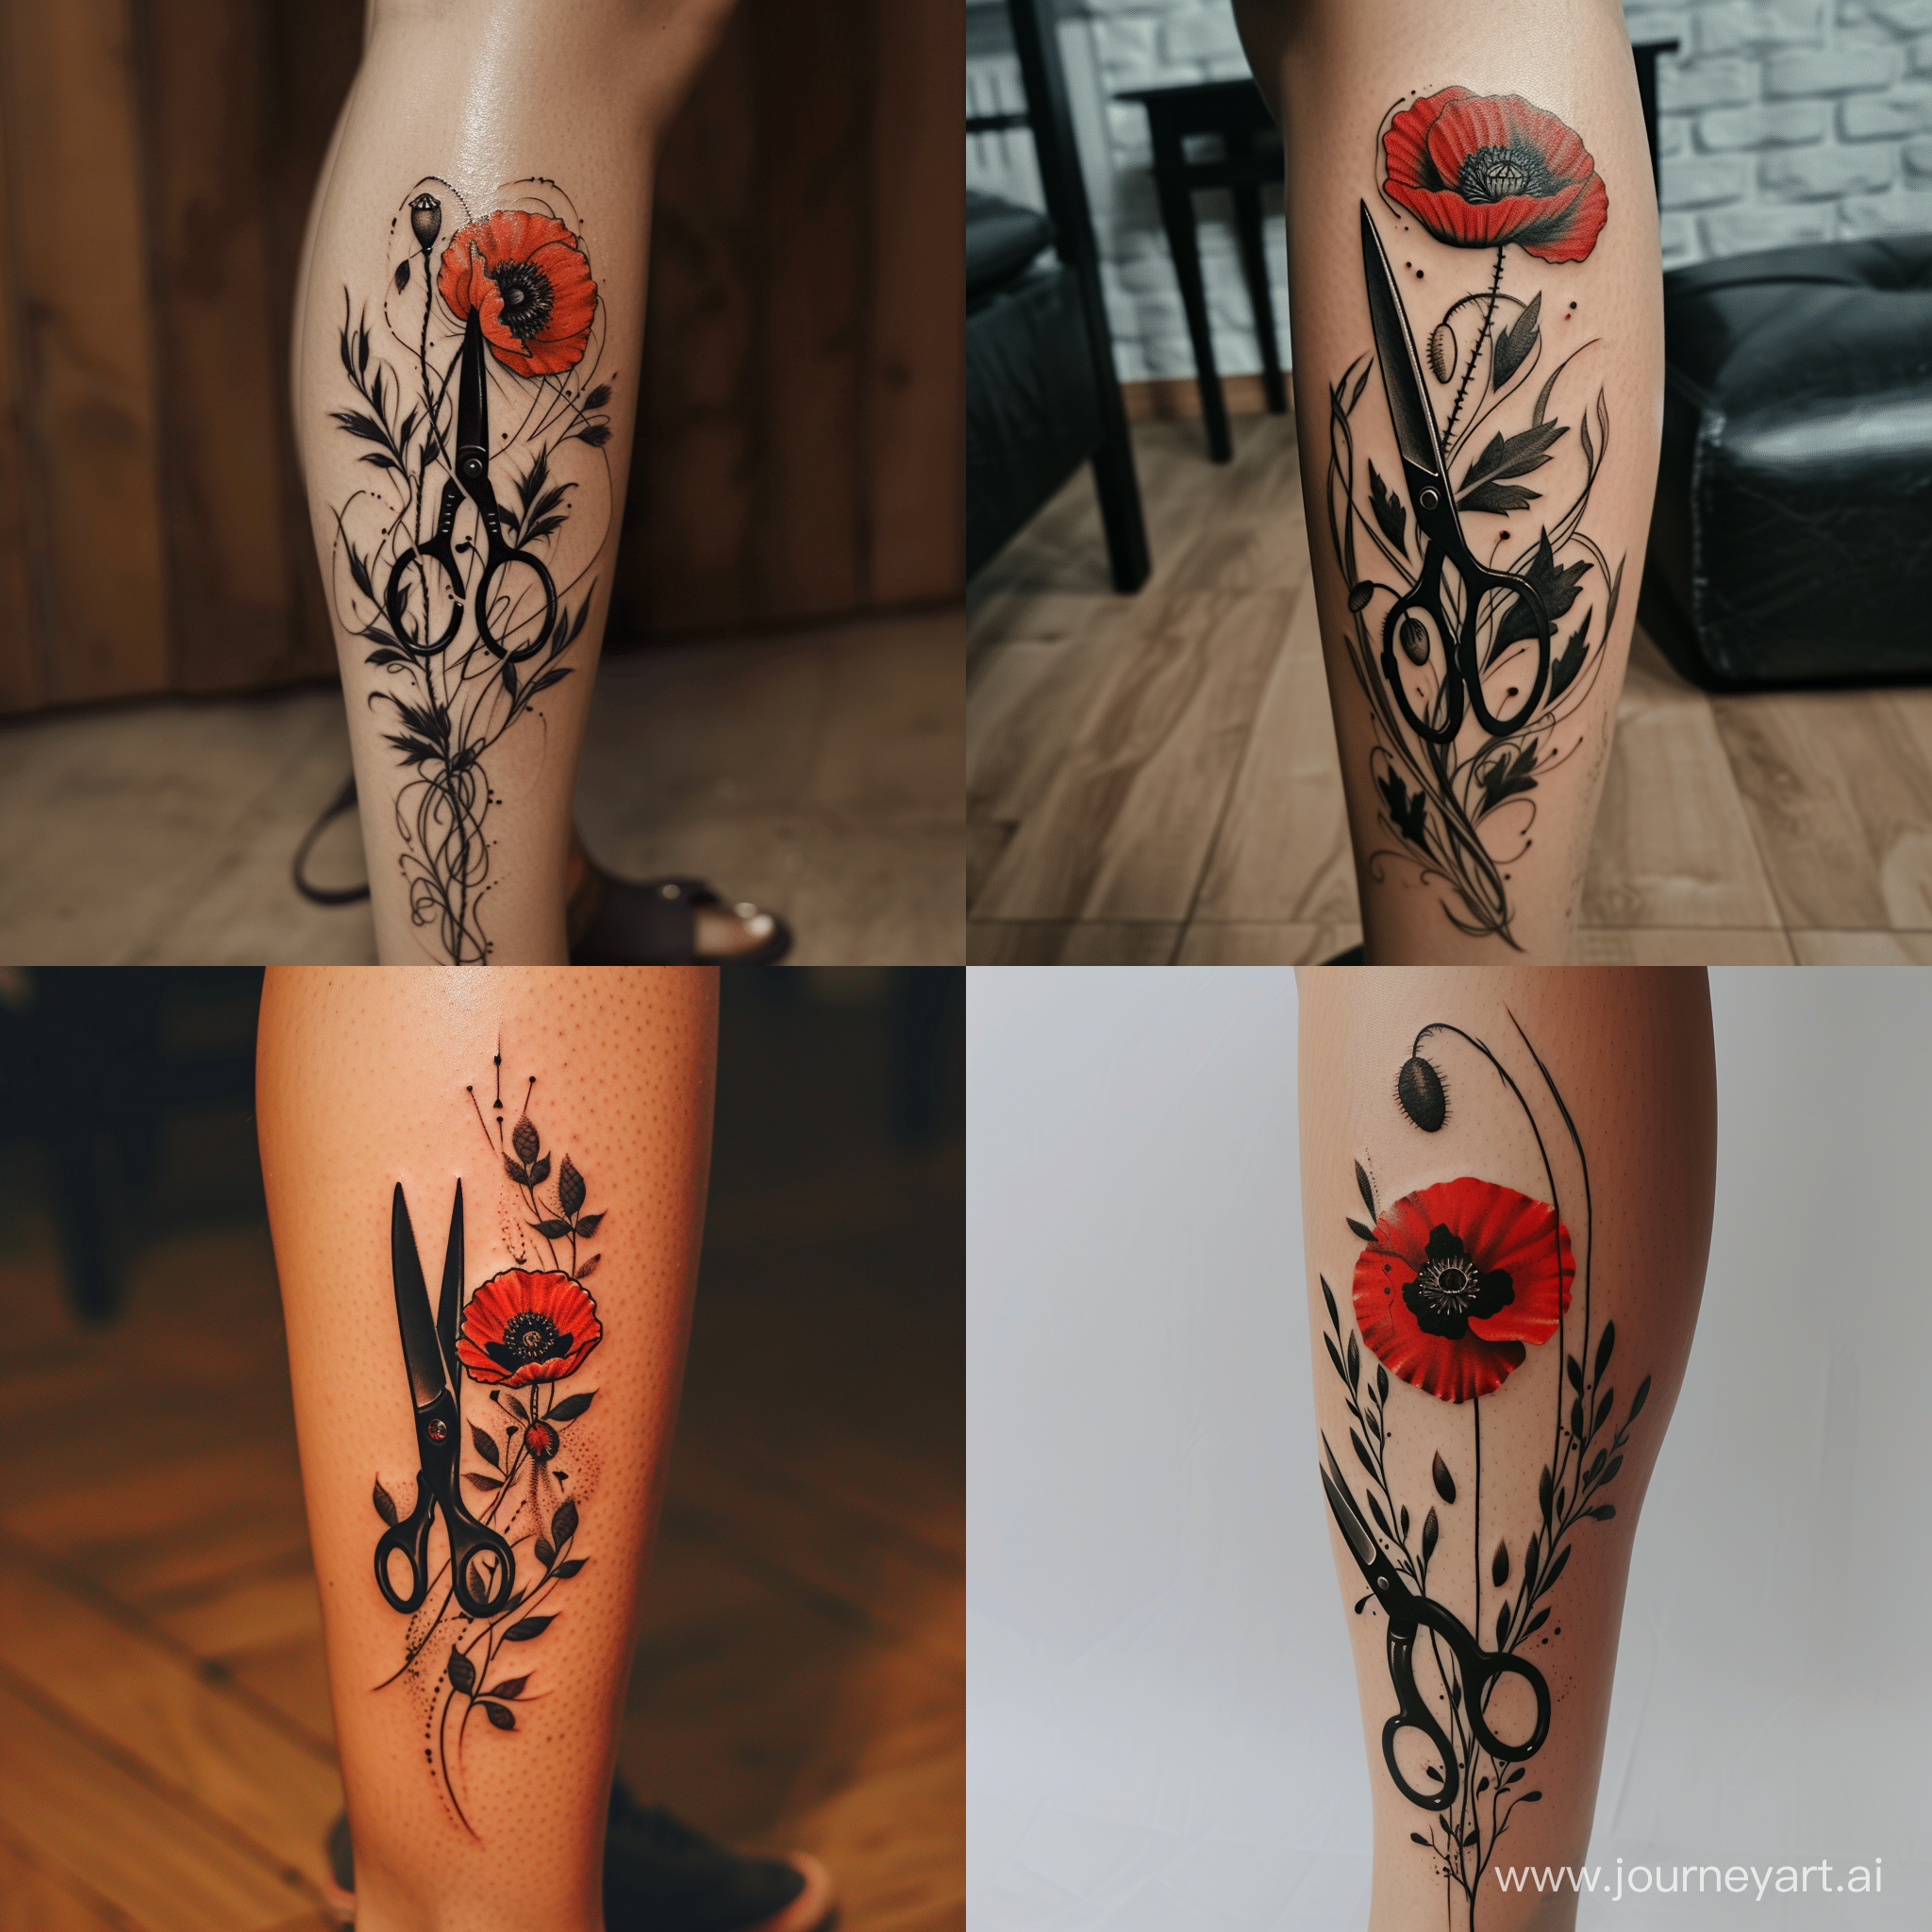 tattoo for leg. black  scissors and poppy flower with black leaves.  (use only red and black colors), the design should be light, delicate, semi-contour